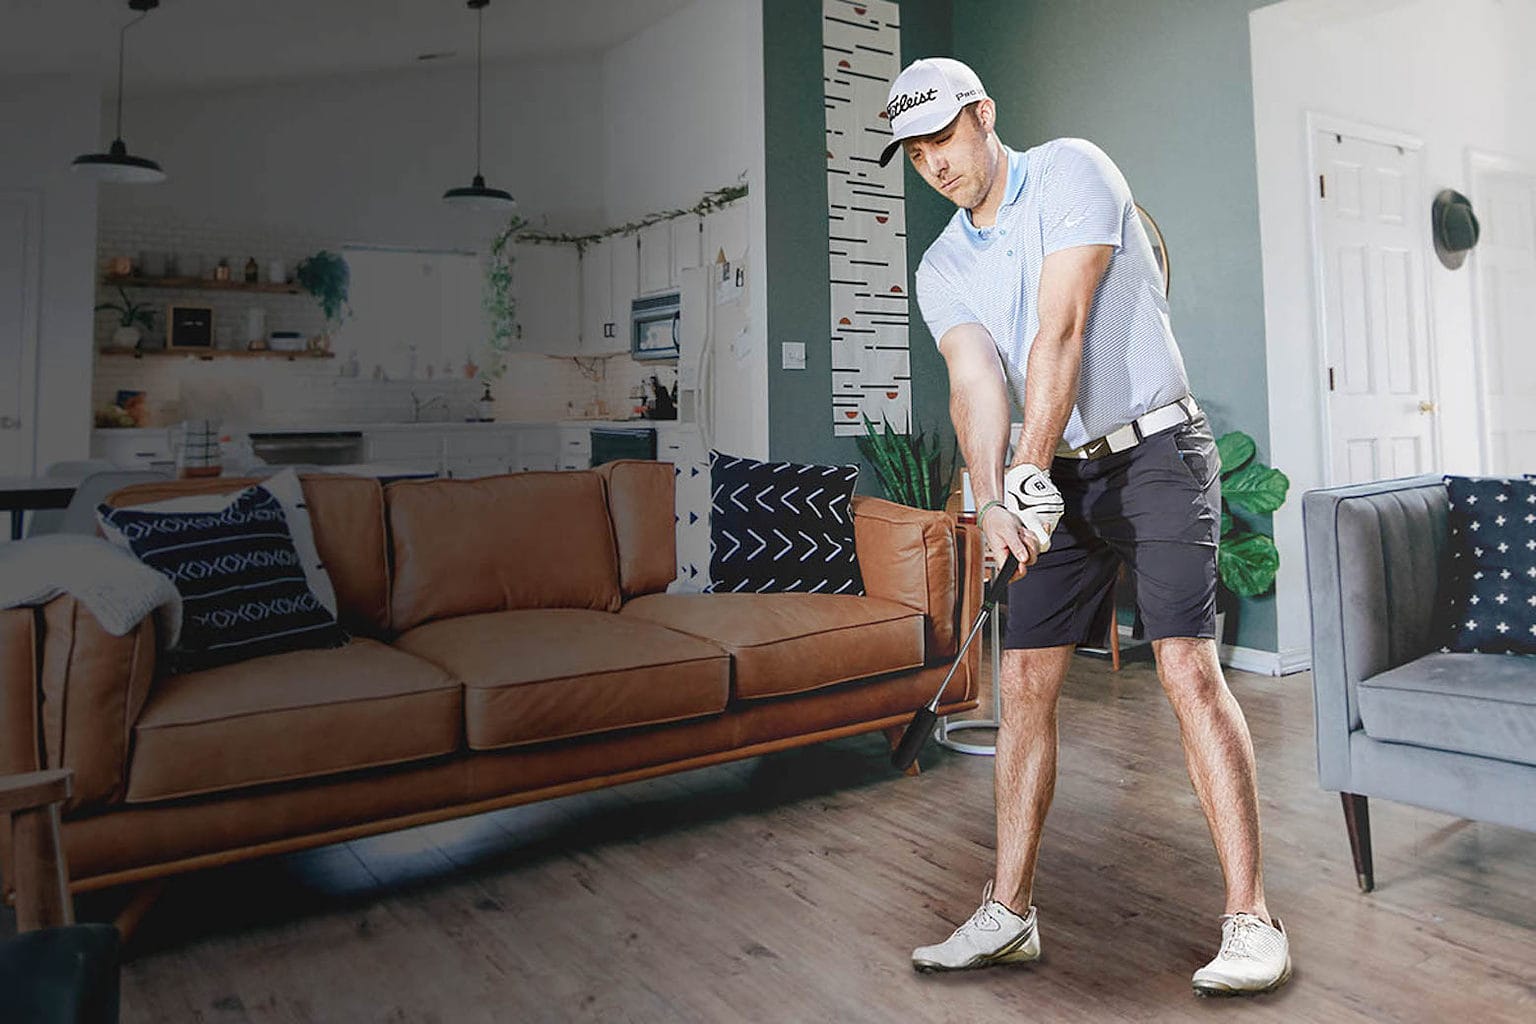 Save nearly 25% off this 4K golf sim and get it in time for Xmas.